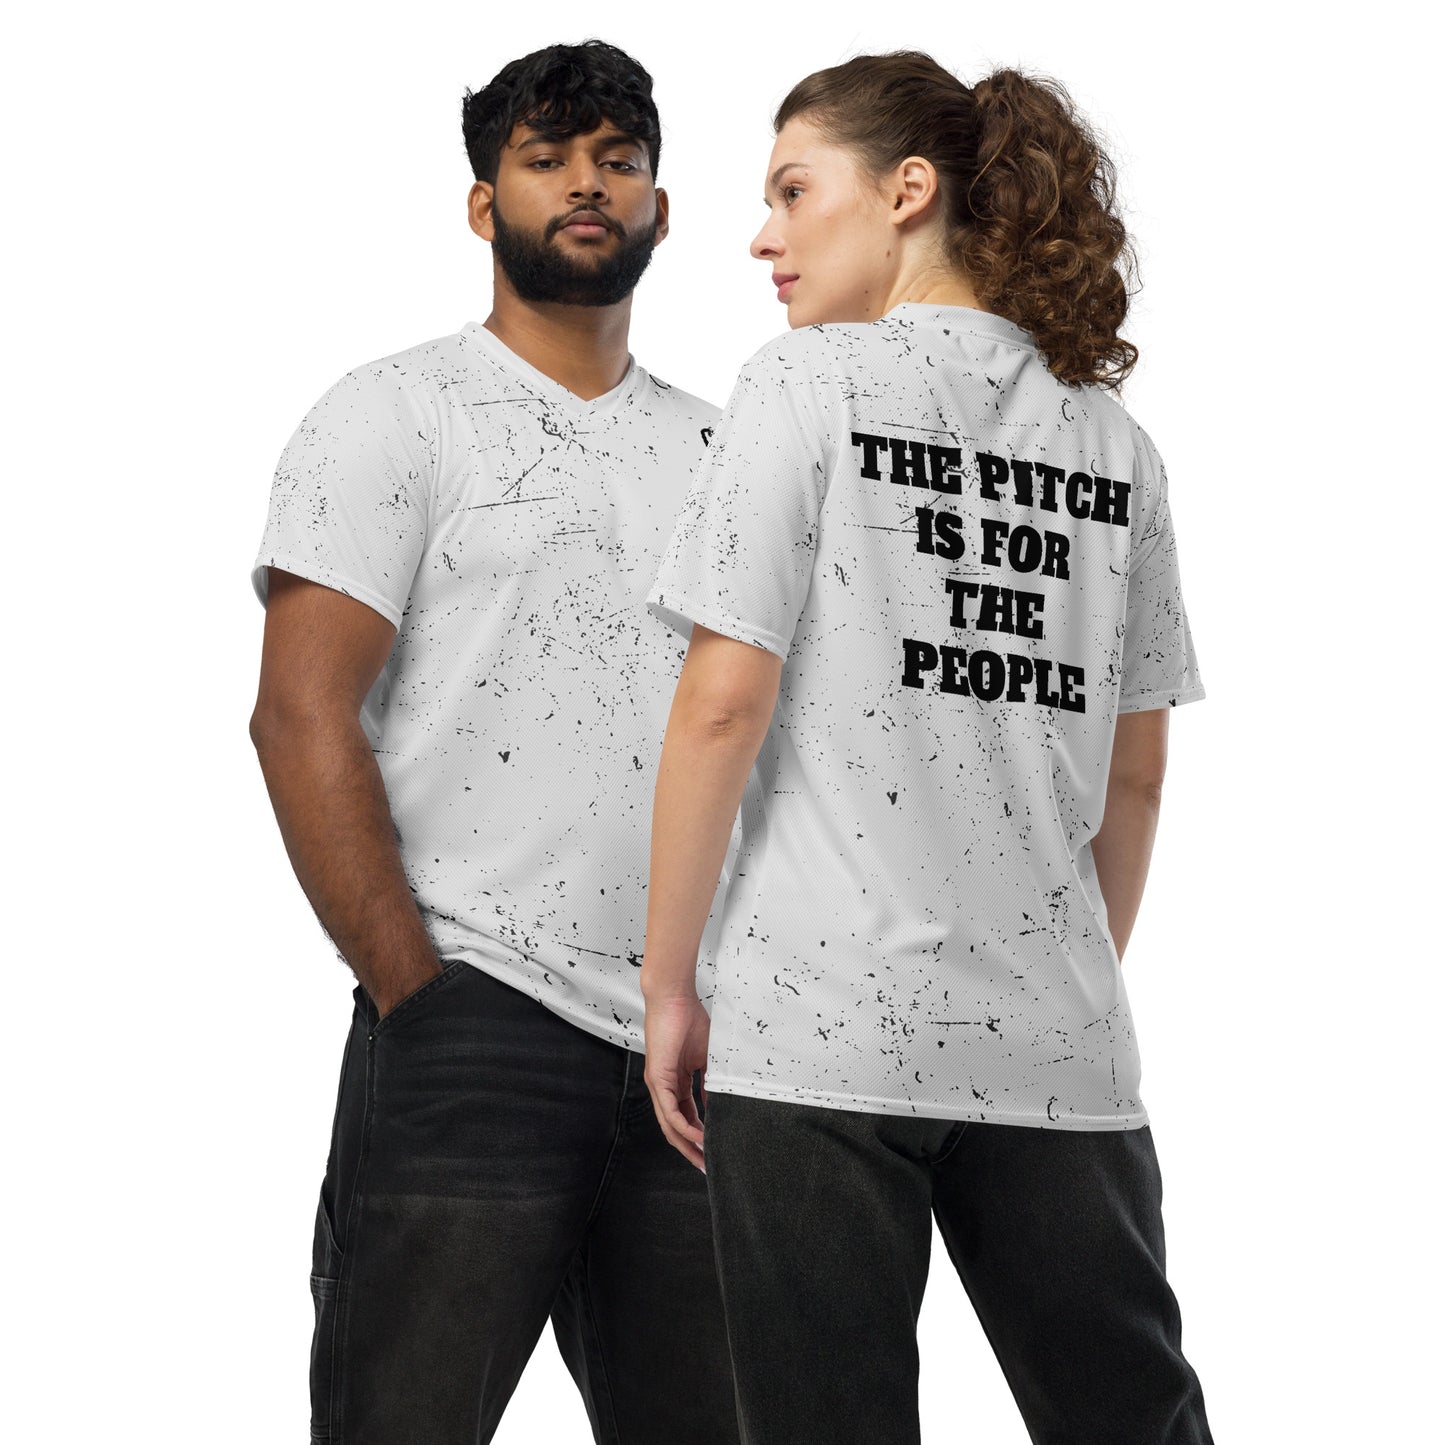 THE PITCH IS FOR THE PEOPLE Jersey (Unisex)